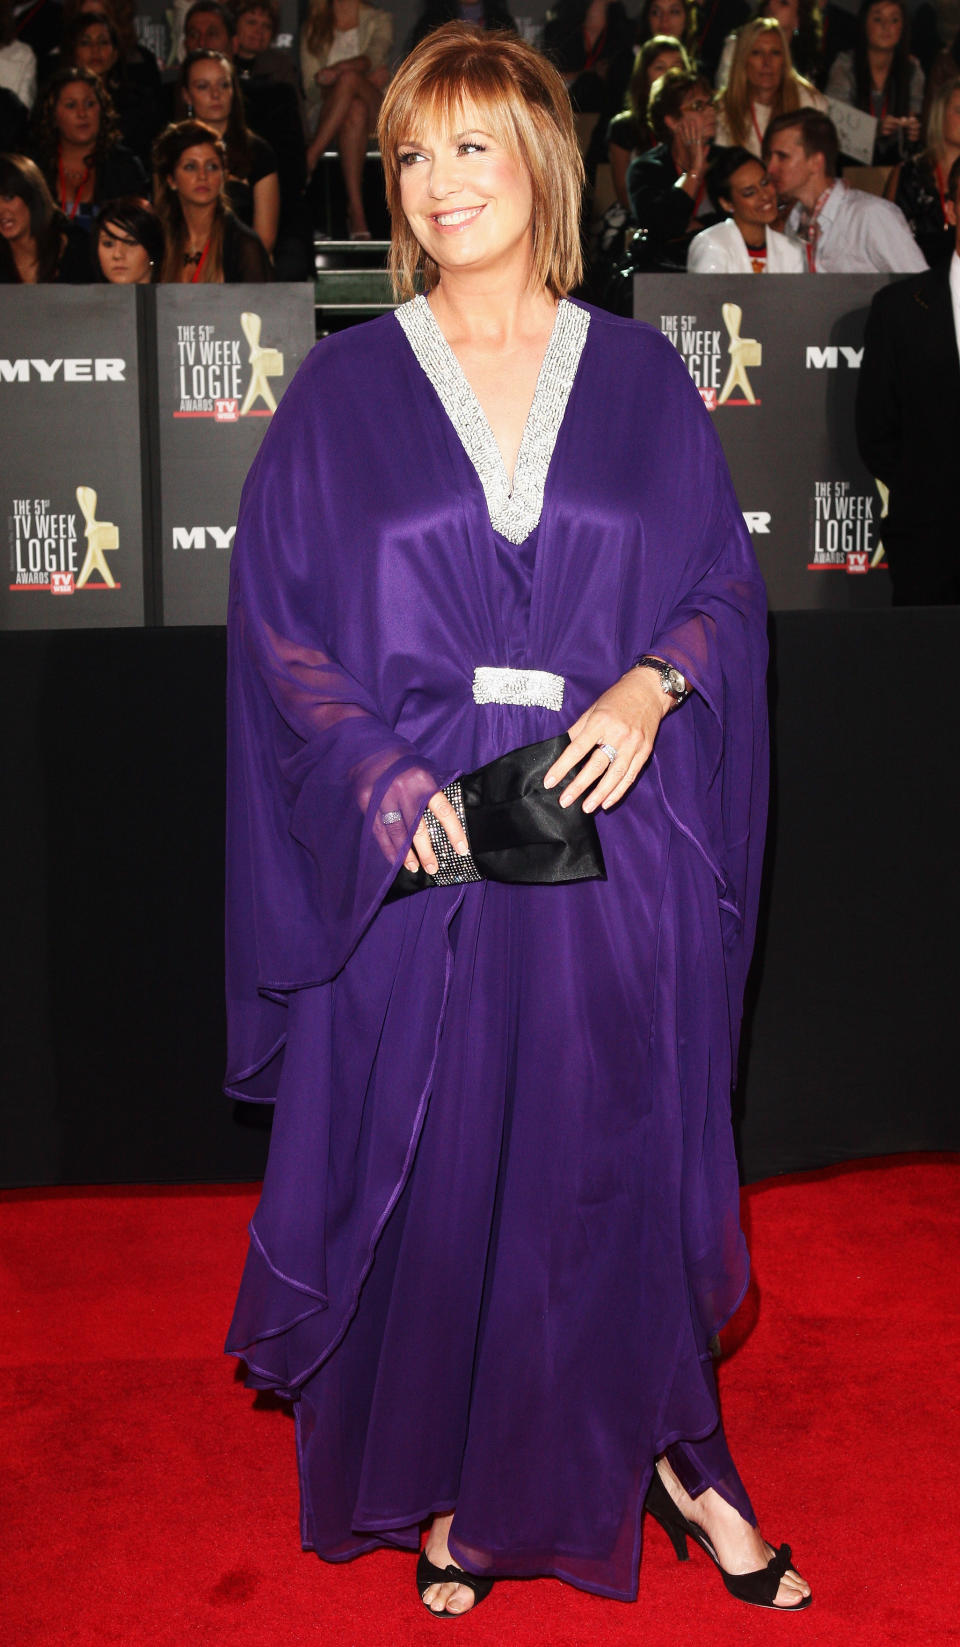 Logies 2009 was the last time Tracy walked the red carpet. Source: Getty Images